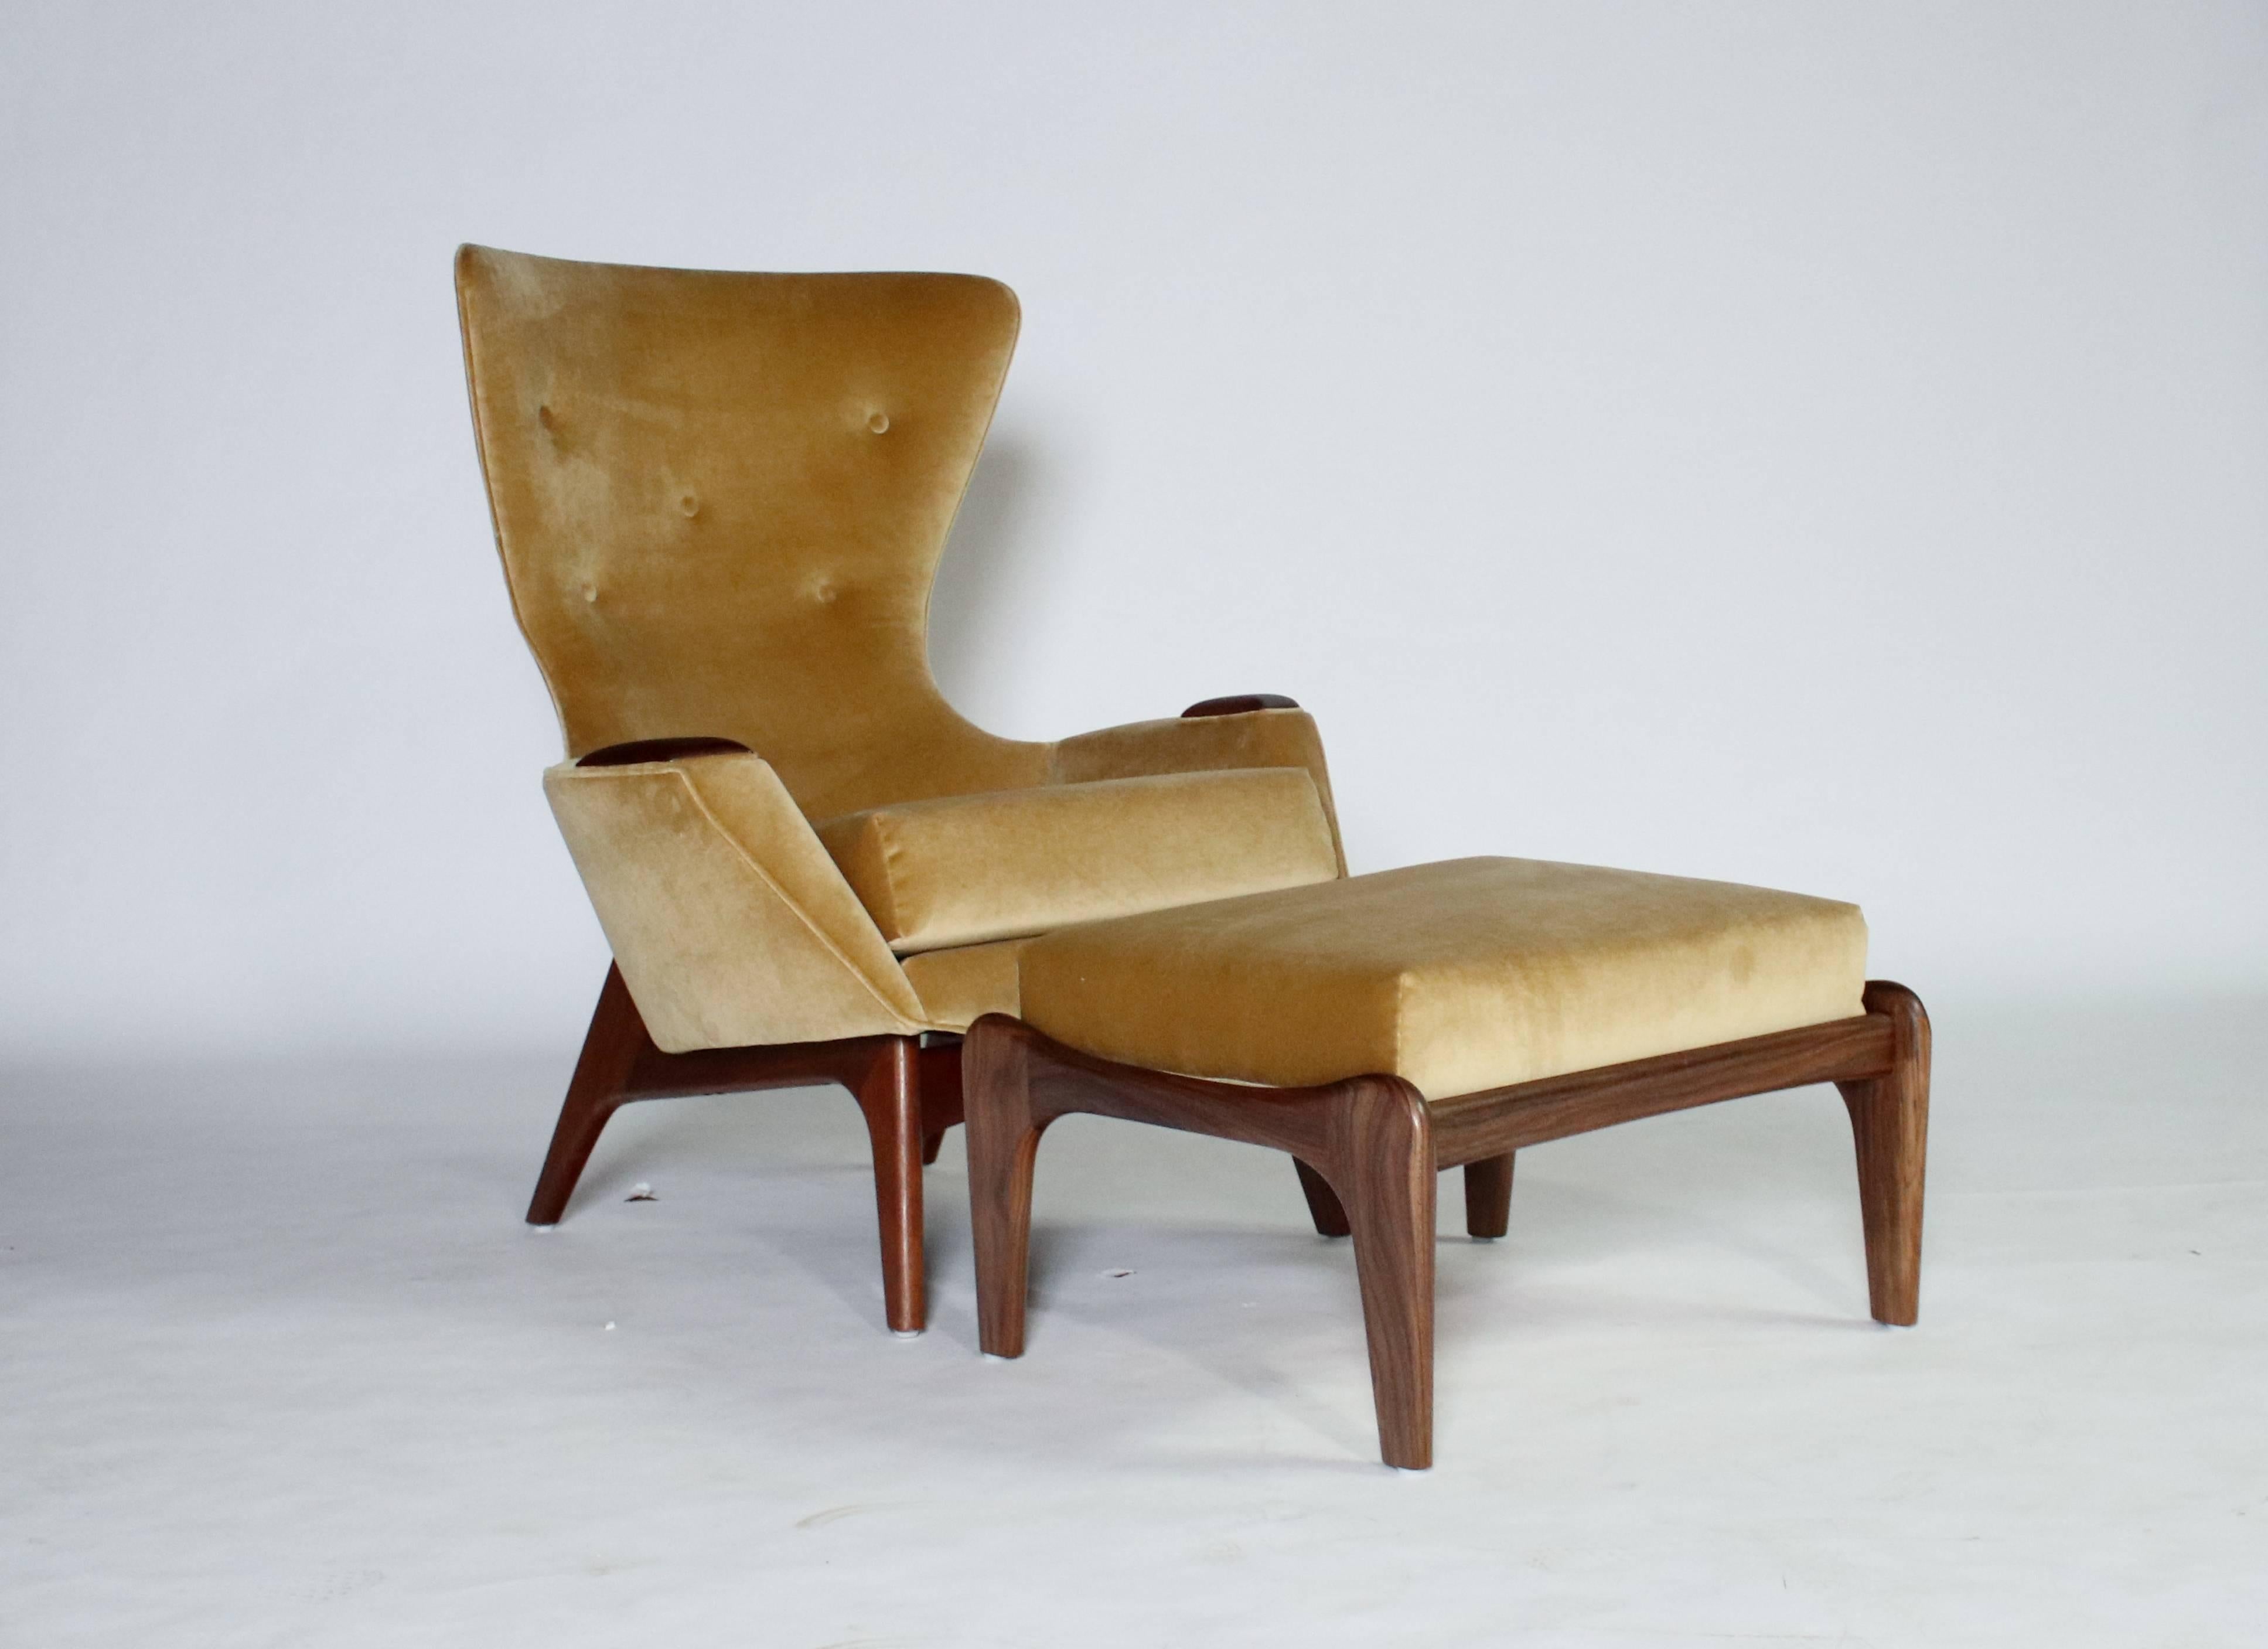 Mid-20th Century Adrian Pearsall Wing Chair for Craft Associates Model 2231-C and Ottoman